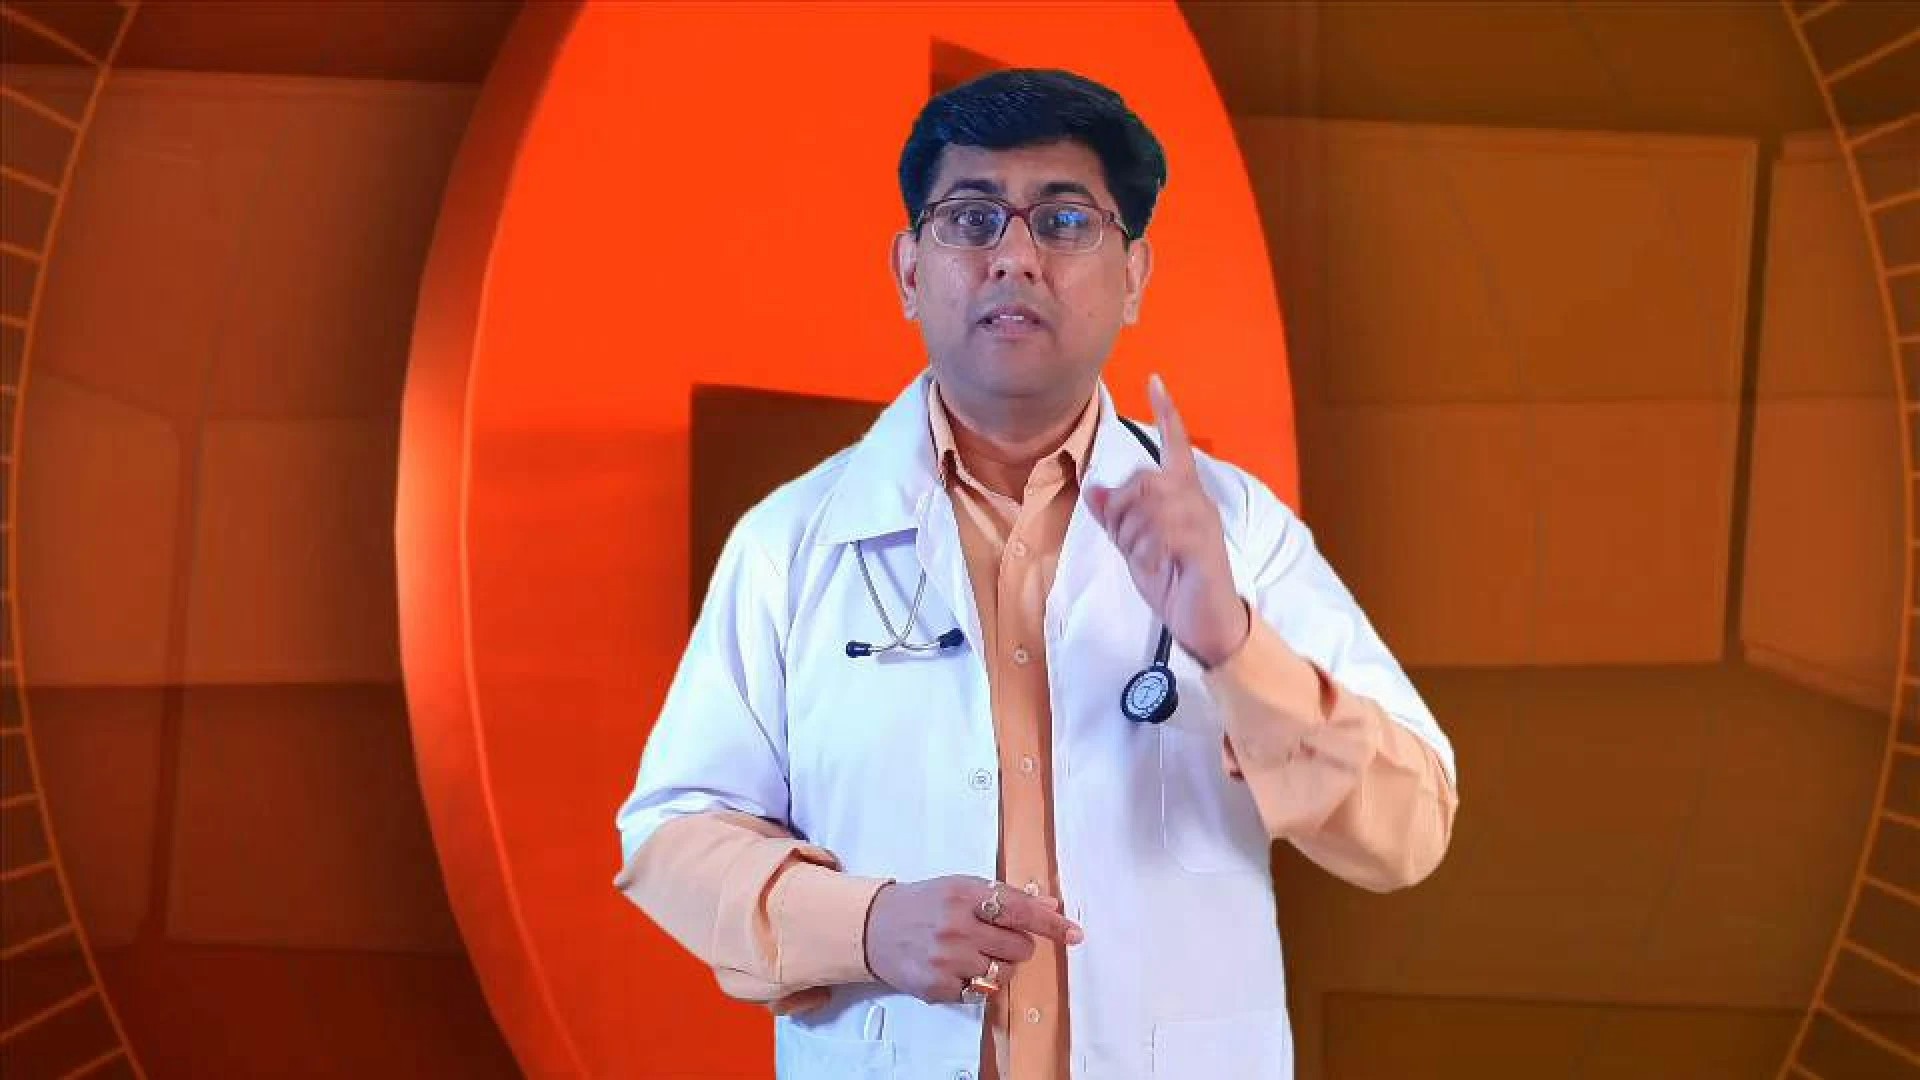 I will be medical spokesperson, doctor in hindi with green screen bg in 4k